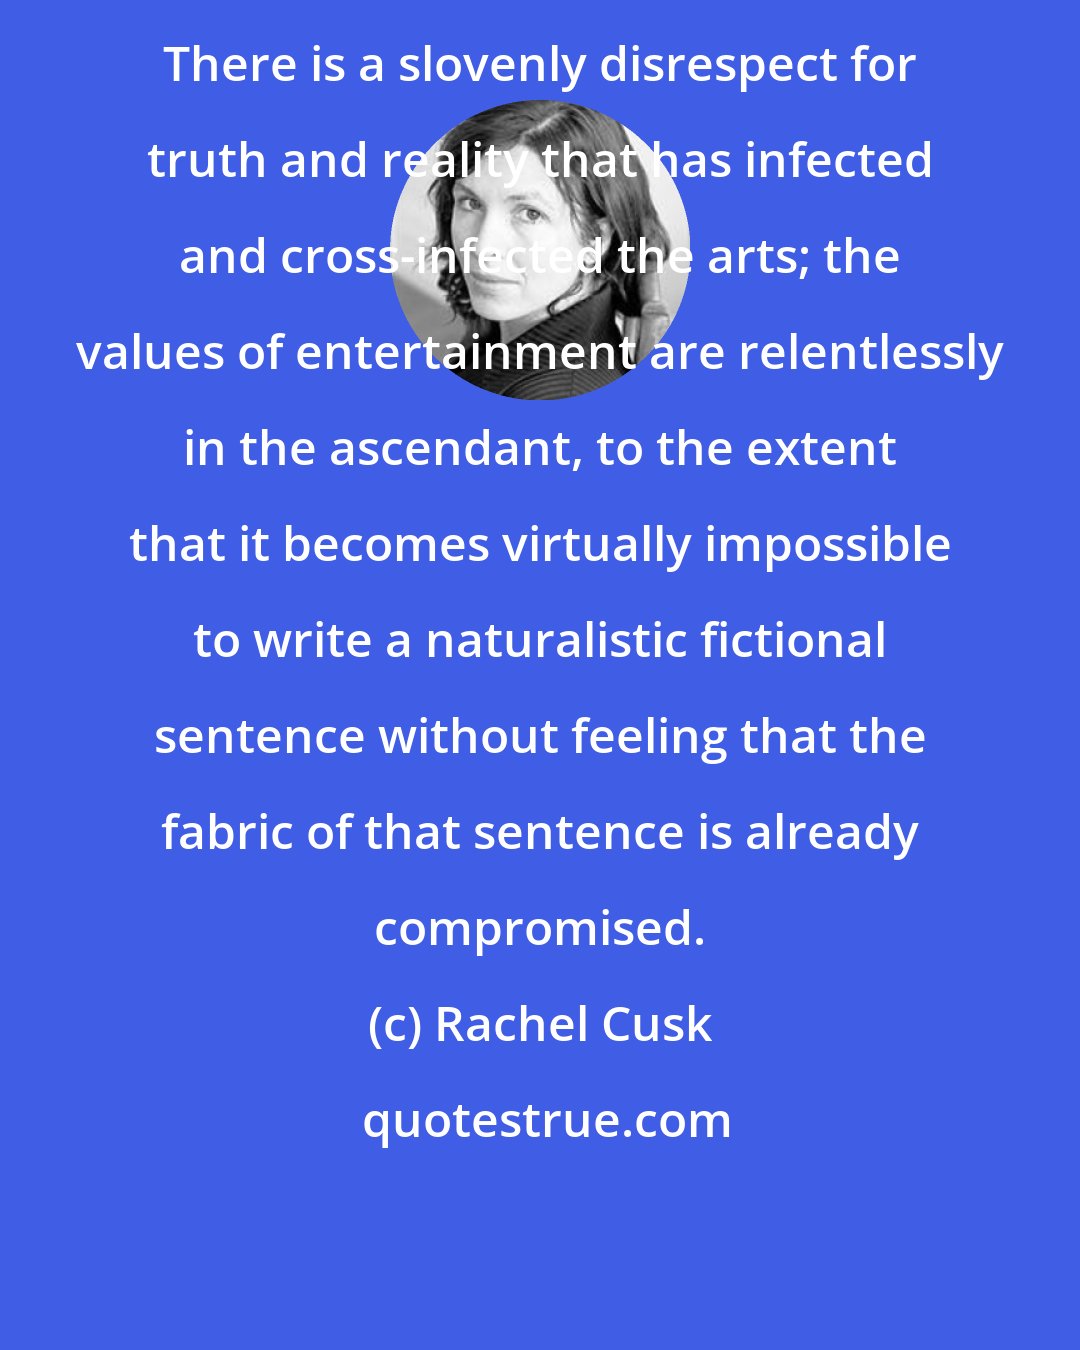 Rachel Cusk: There is a slovenly disrespect for truth and reality that has infected and cross-infected the arts; the values of entertainment are relentlessly in the ascendant, to the extent that it becomes virtually impossible to write a naturalistic fictional sentence without feeling that the fabric of that sentence is already compromised.